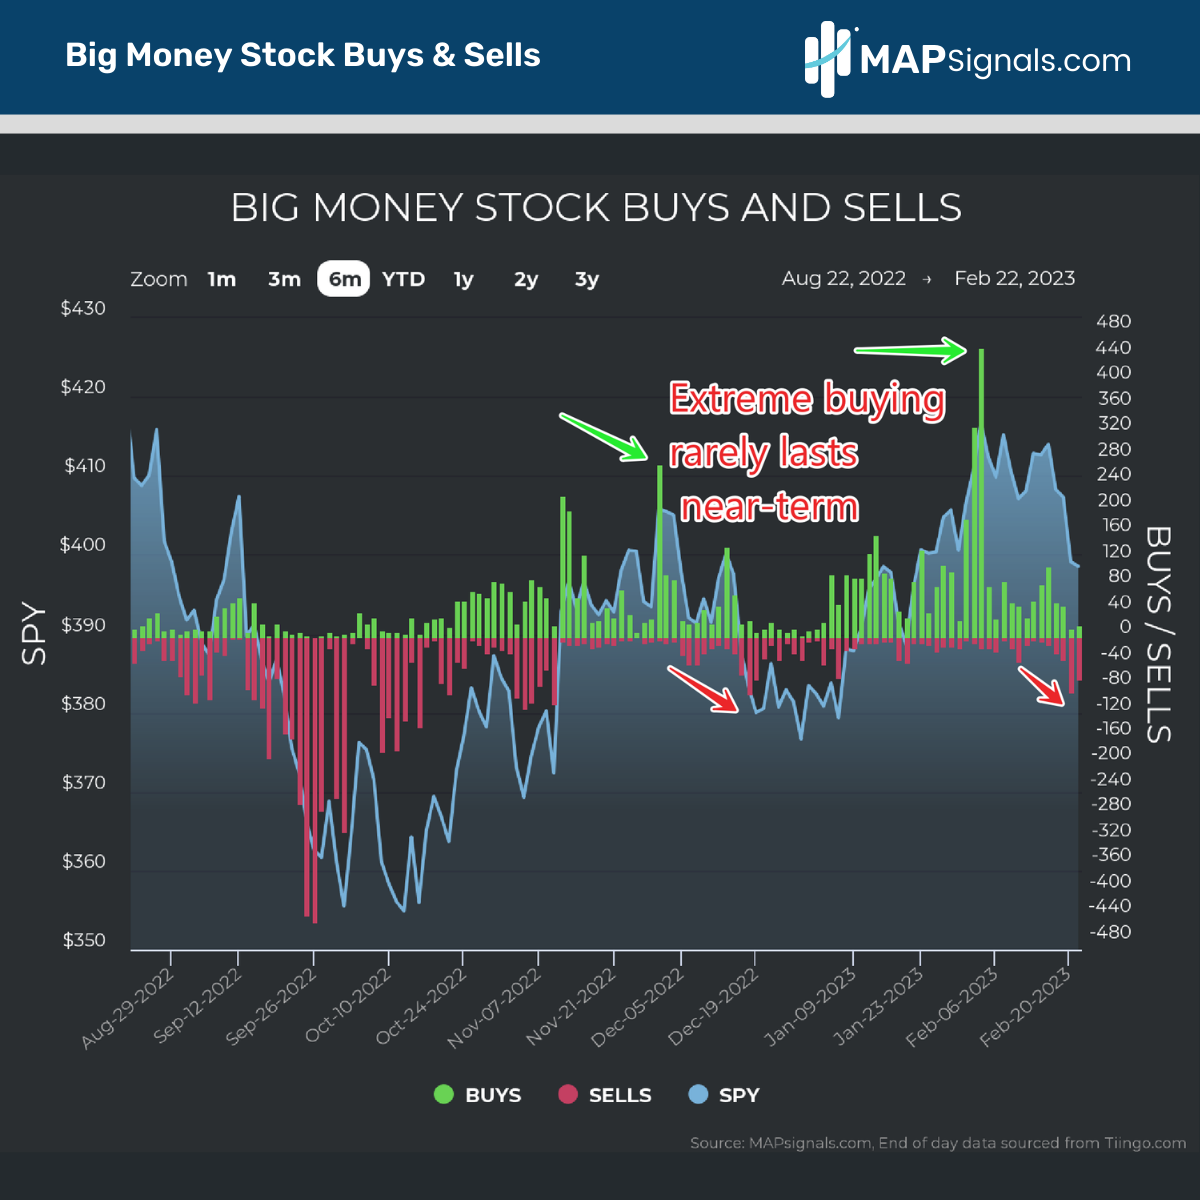 Extreme buying rarely lasts near-term | Big Money Stock Buys & Sells